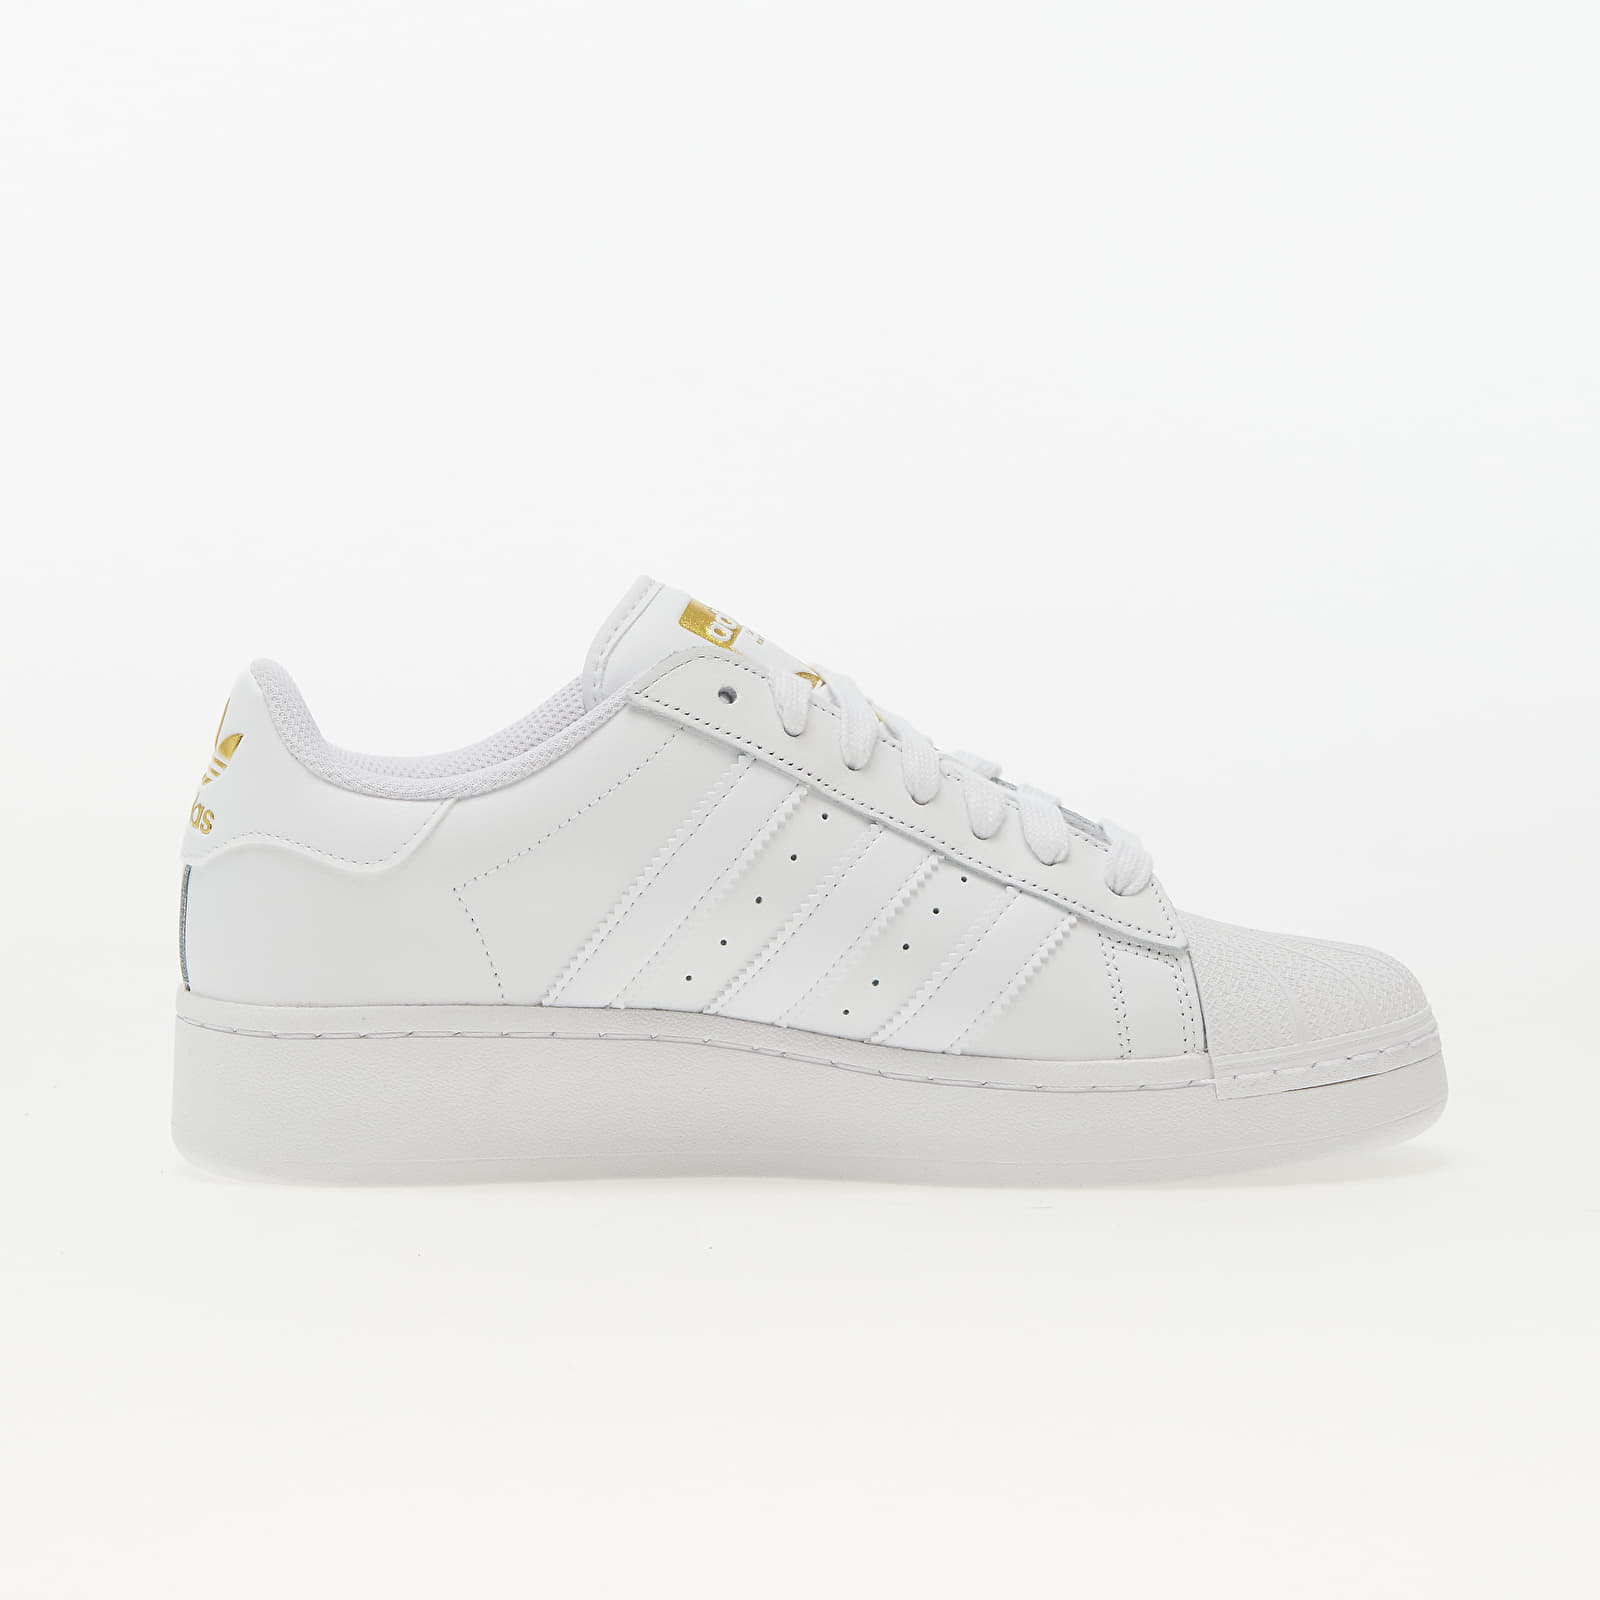 superstar white sneakers